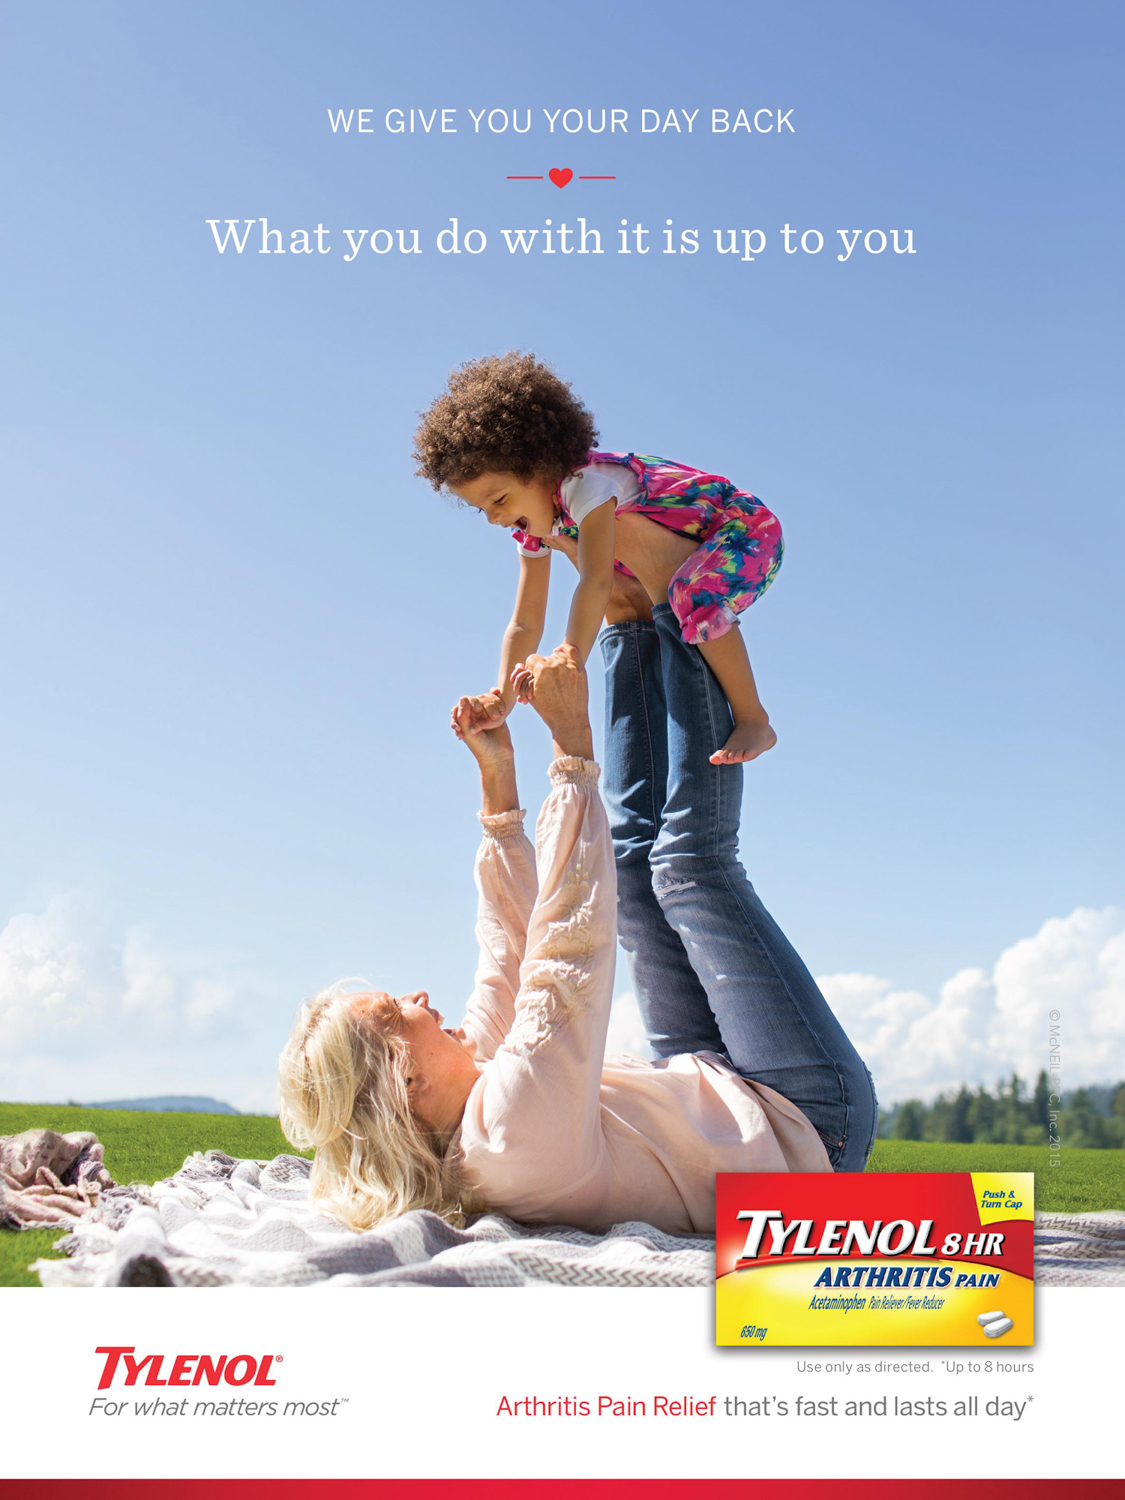 A woman plays outside with her granddaughter in a Tylenol Ad Campaign photographed by Lifestyle Photographer Diana Mulvihill